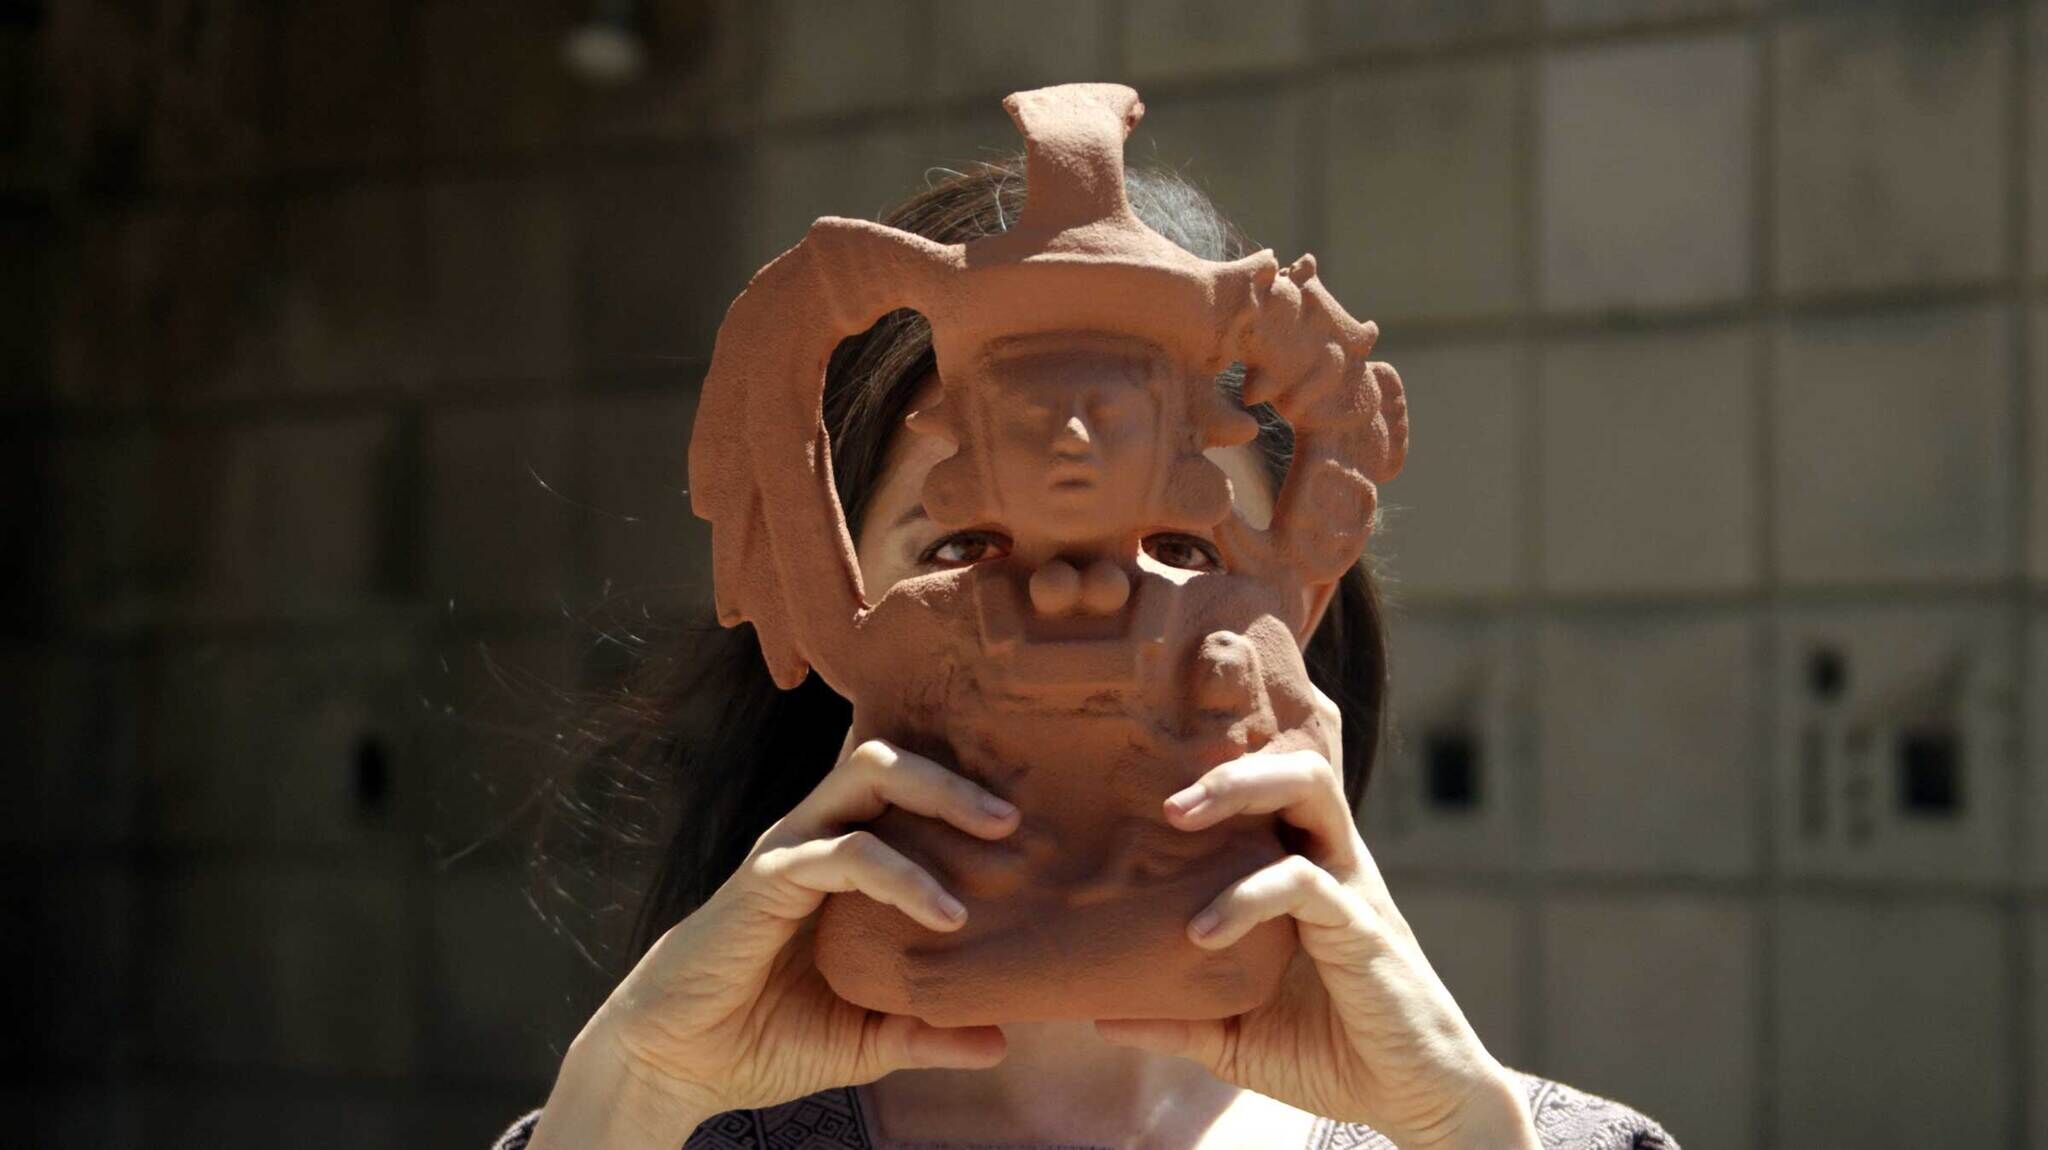 A figure with brown hair holds a terracotta Pre-Columbian figurine in front of her face. Her eyes gaze through the gaps in the figurine's intricate clay headdress.